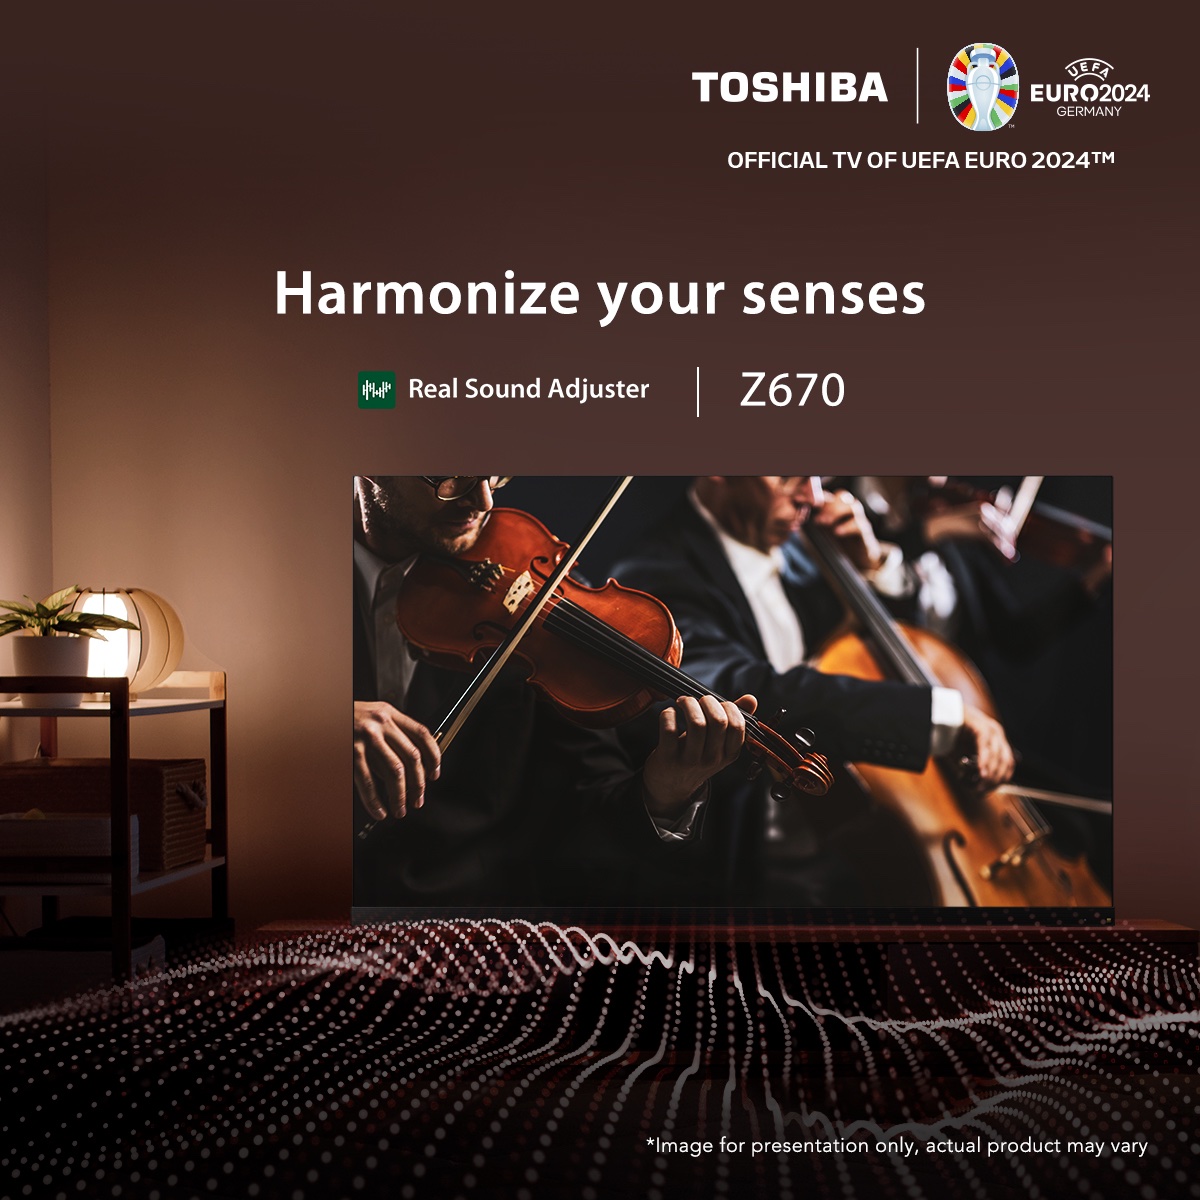 Date night just got an upgrade. With powerful, harmonized audio from our new #ToshibaTV Z670, head to a jazz lounge without ever leaving the comfort of your bed. Relish a romantic night in that automatically fine-tunes frequencies note by note.